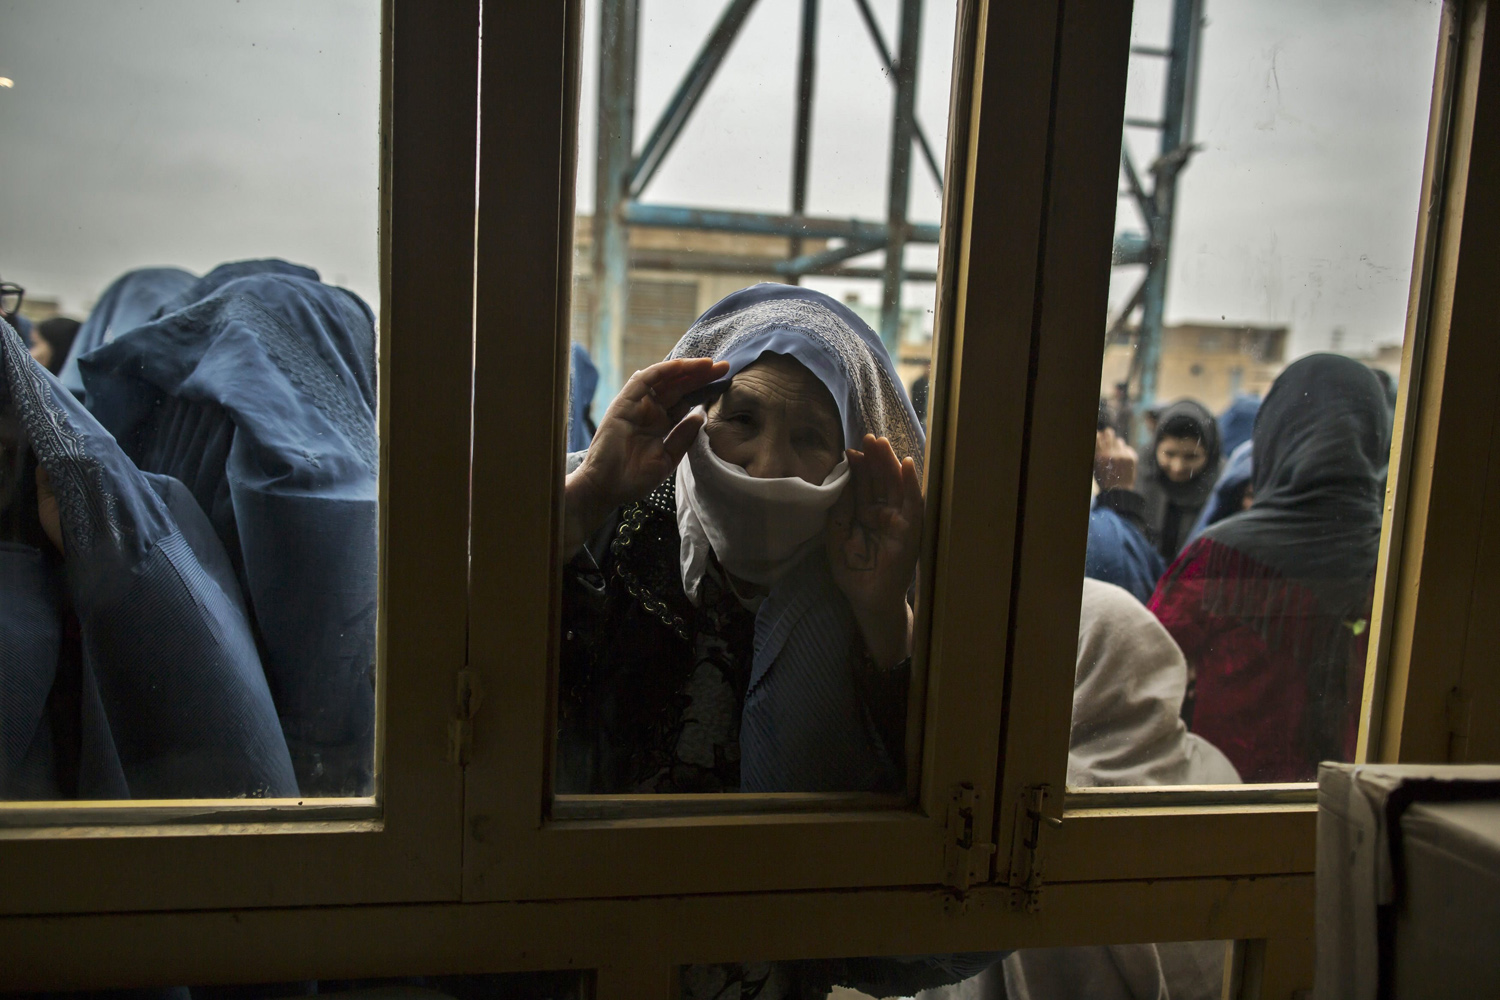 An Afghan woman looks through a window as she waits for her turn to vote at a polling station in Mazar-i-sharif